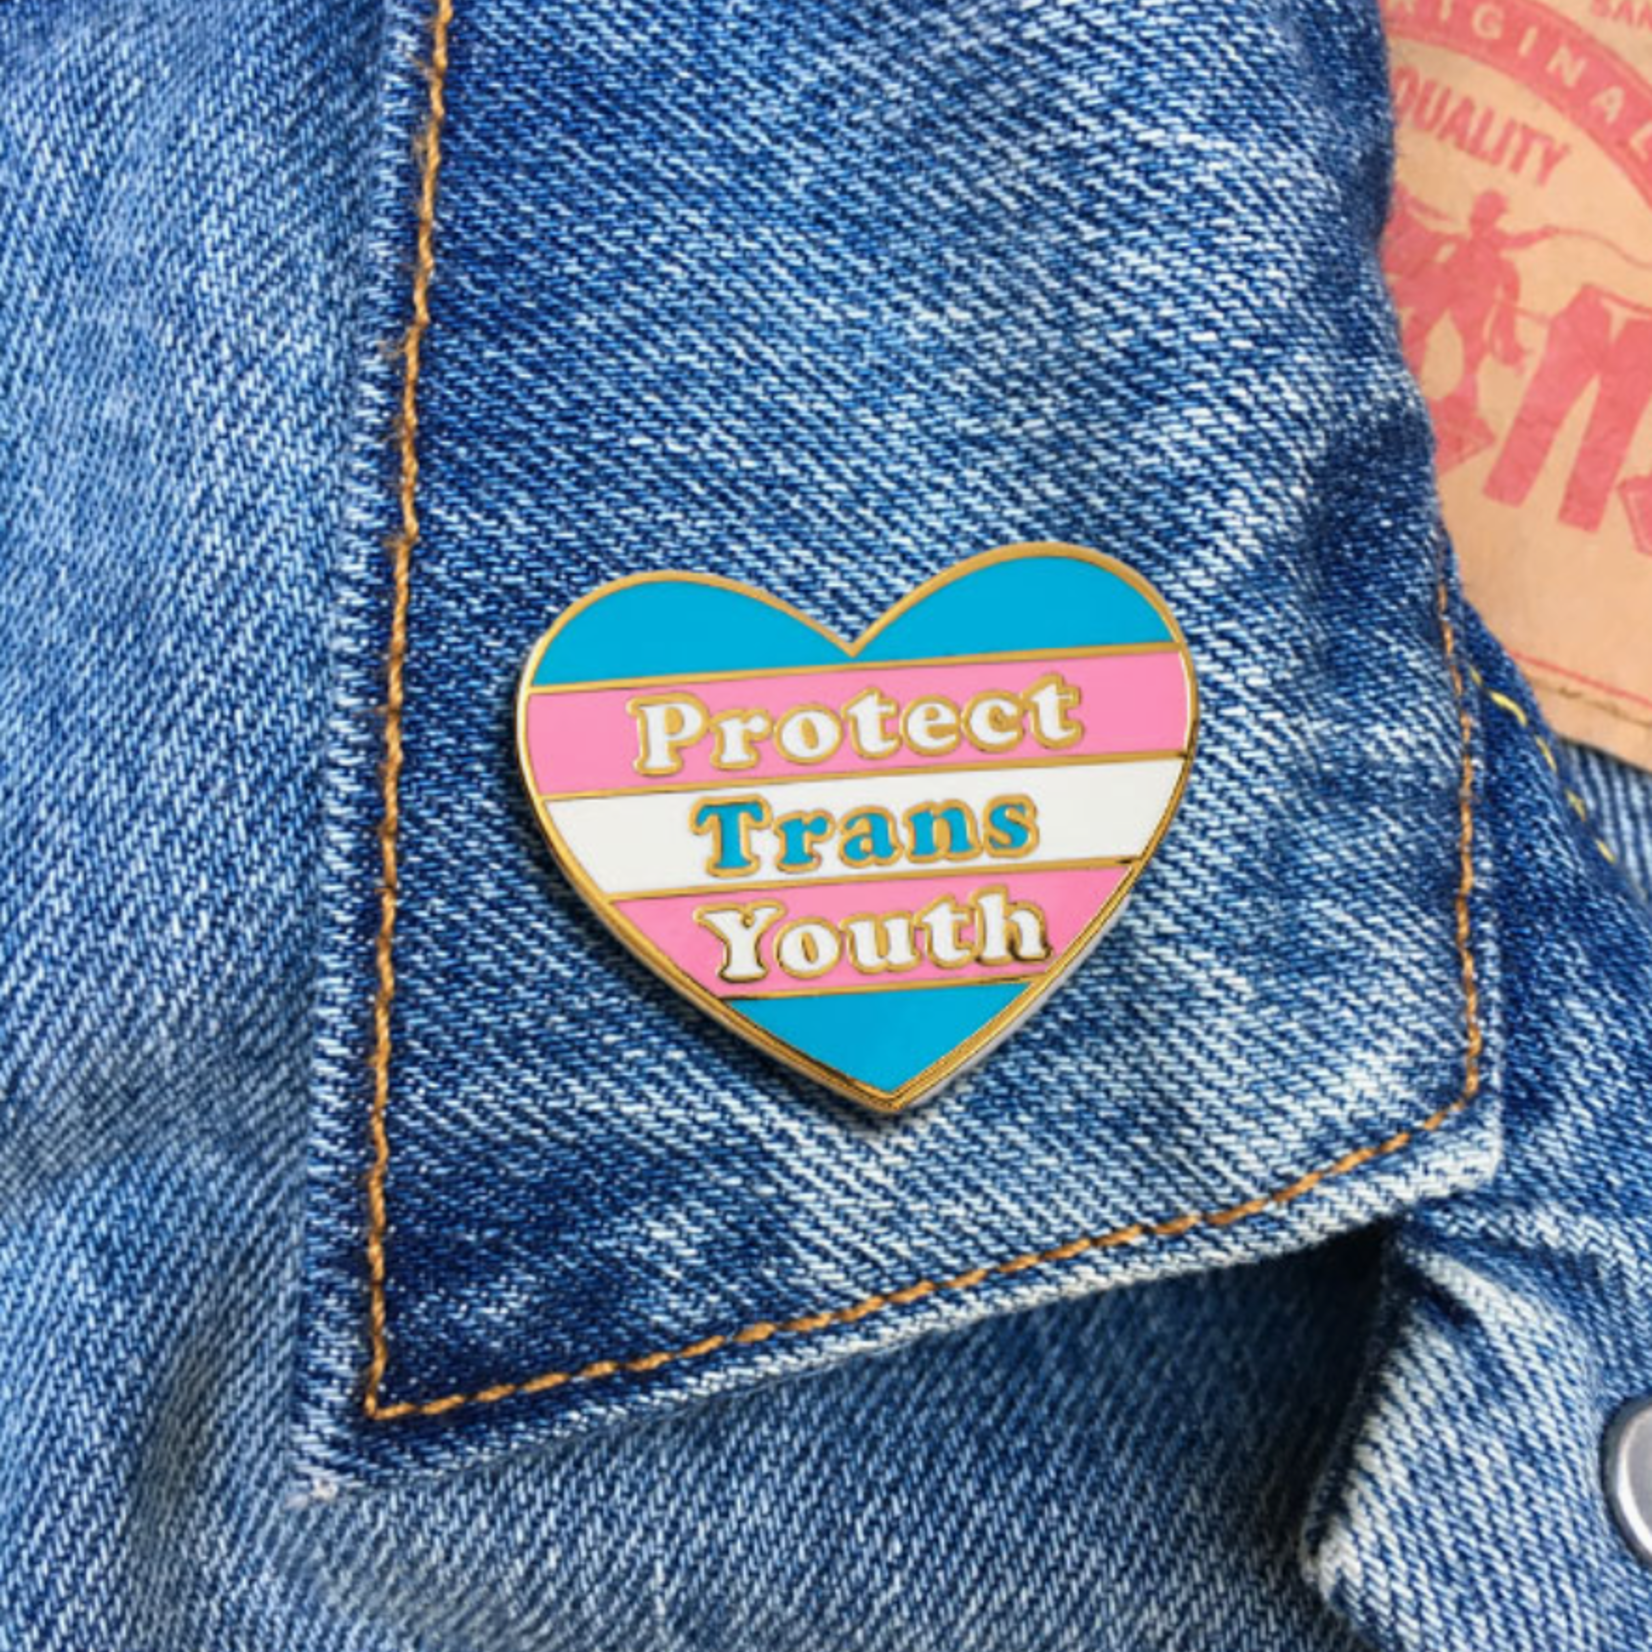 The Found Protect Trans Youth Pin